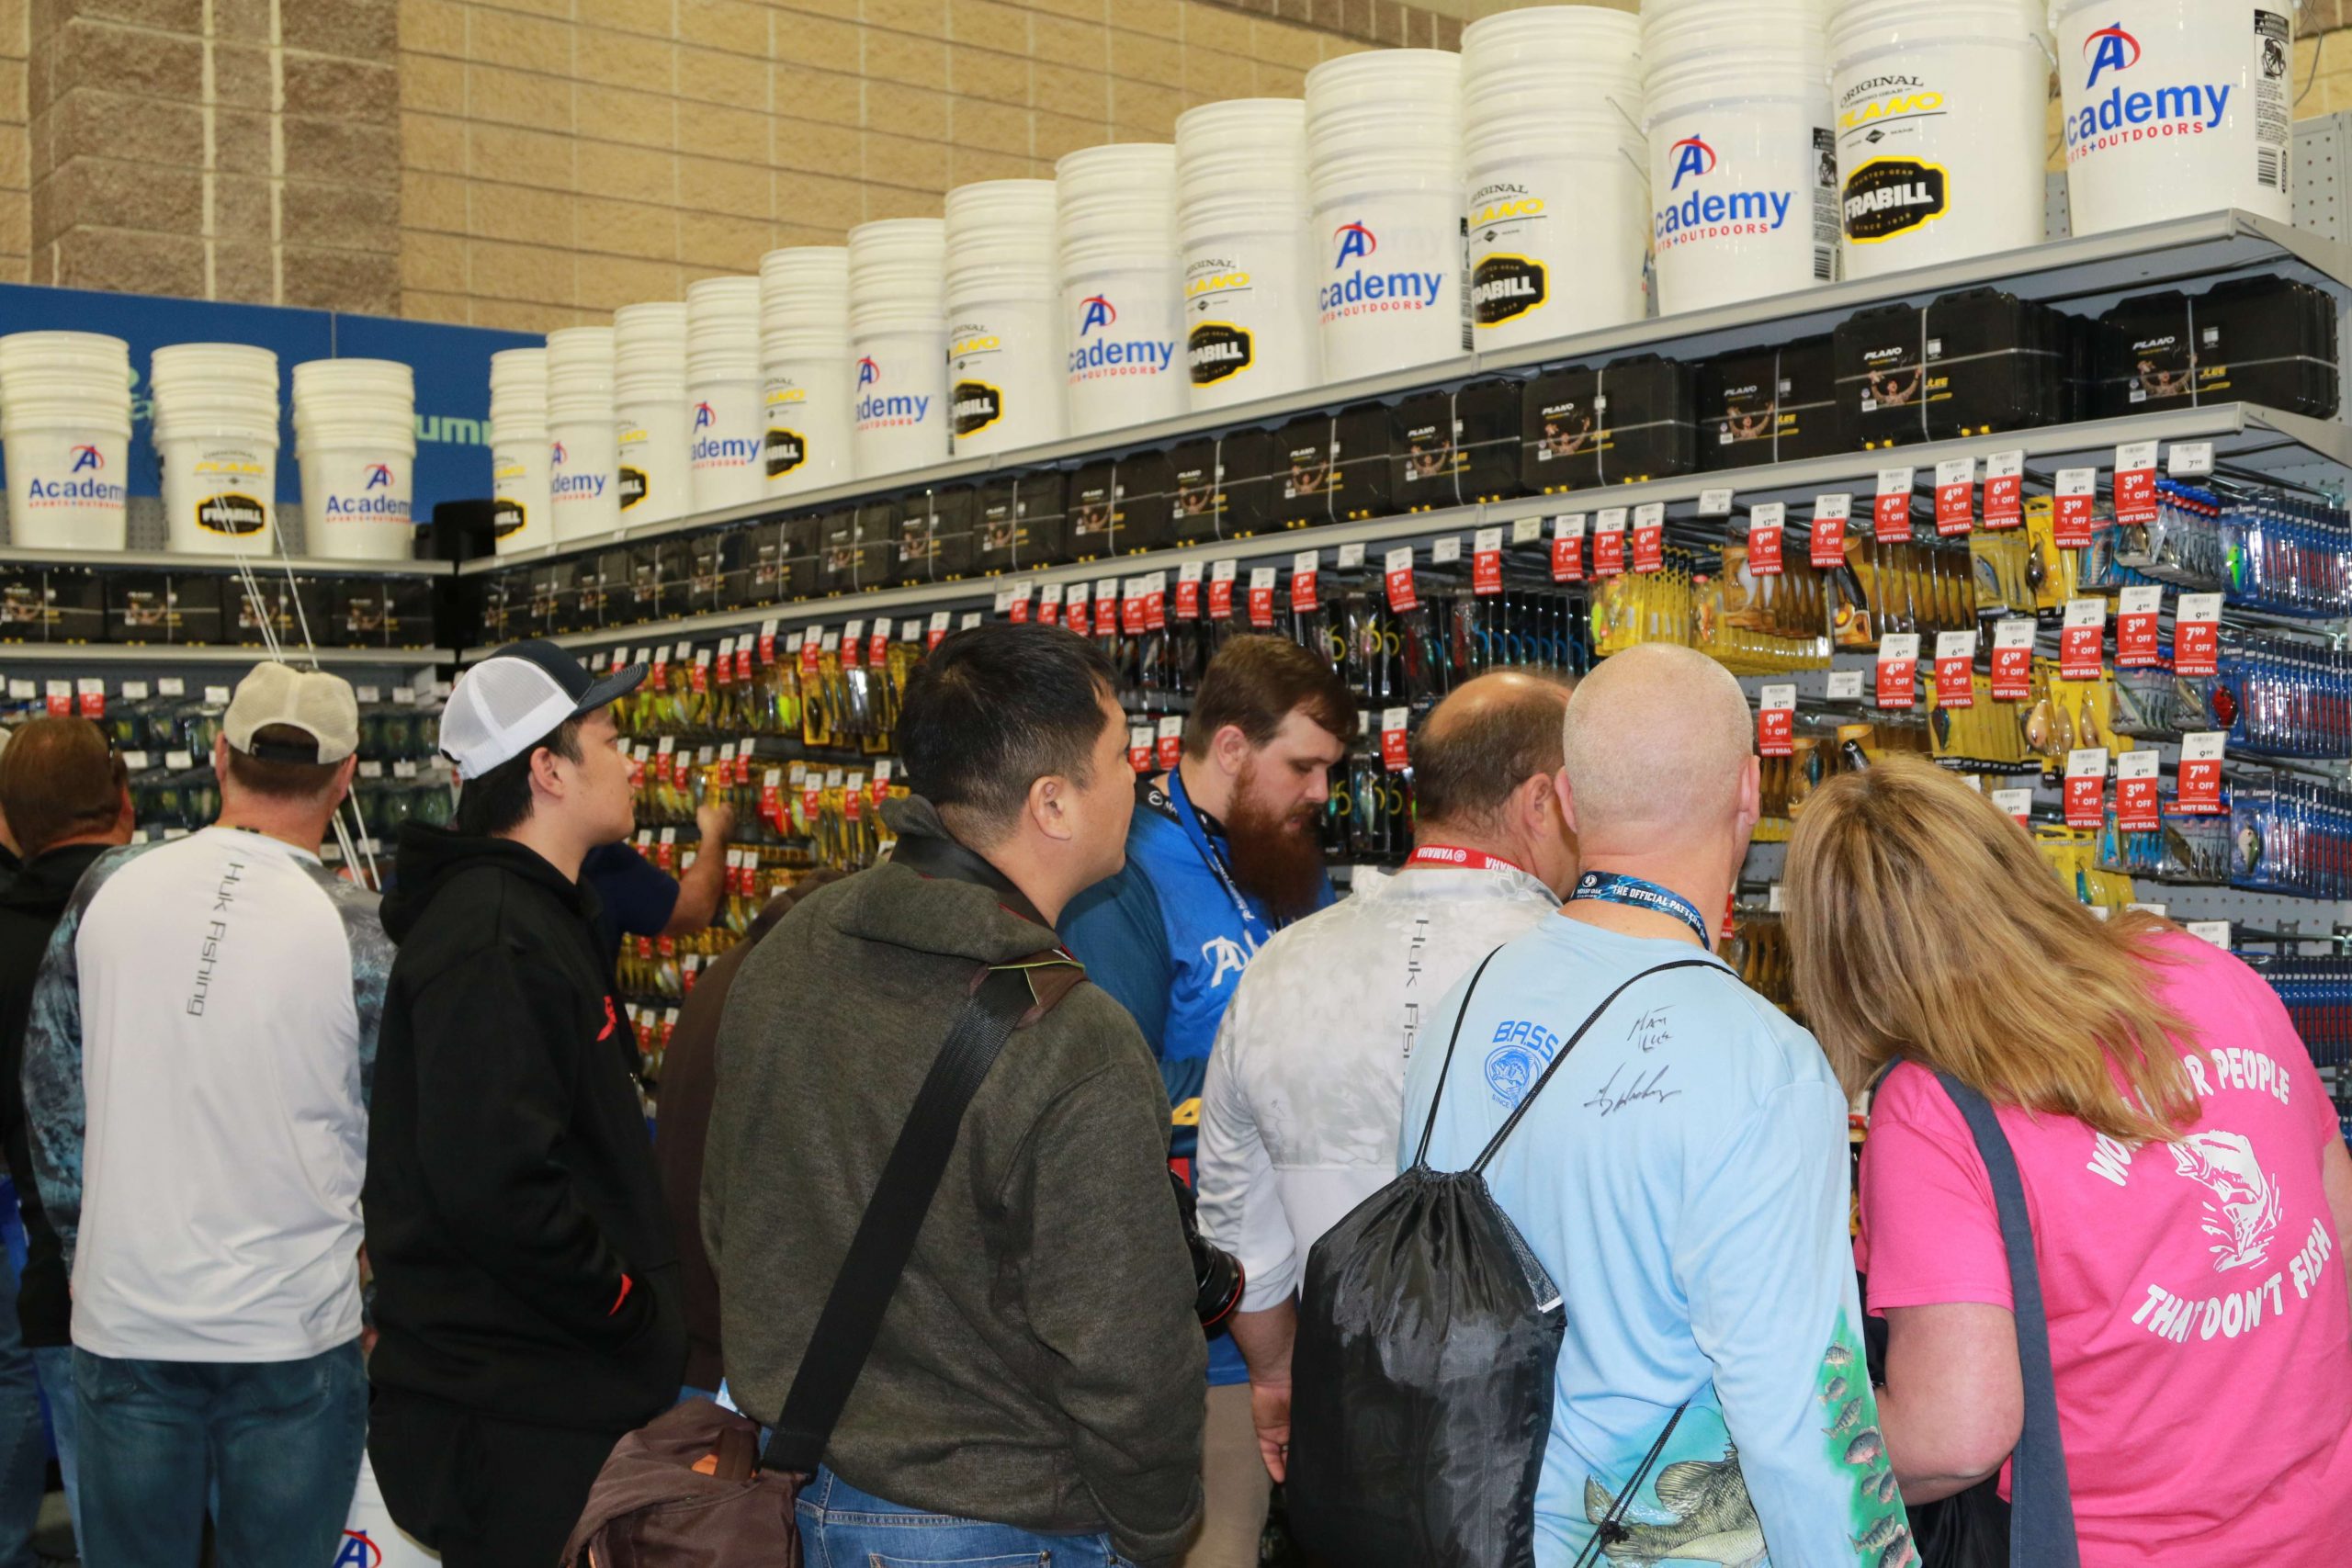 You can never have too much fishing tackle and Academy Sports & Outdoors made sure Expo visitors had plenty of options.